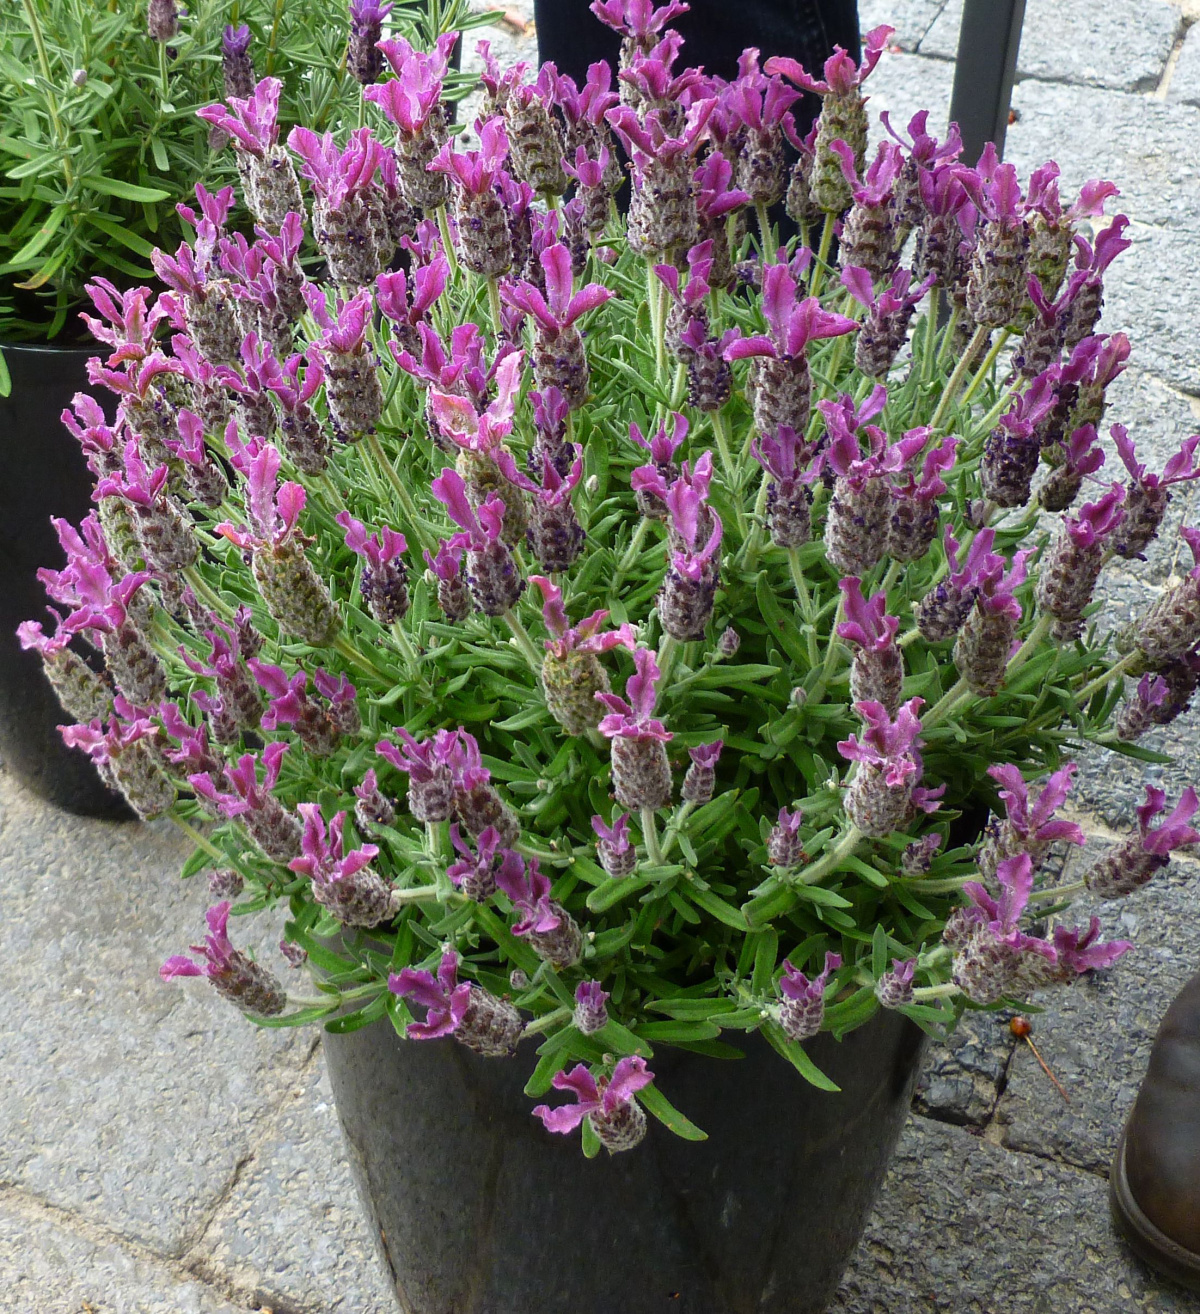 Lavender Deep Anouk Rose actually has a deep pink color and blooms from mid to late summer. It grows 14 to 18 inches tall and spreads just over a foot.